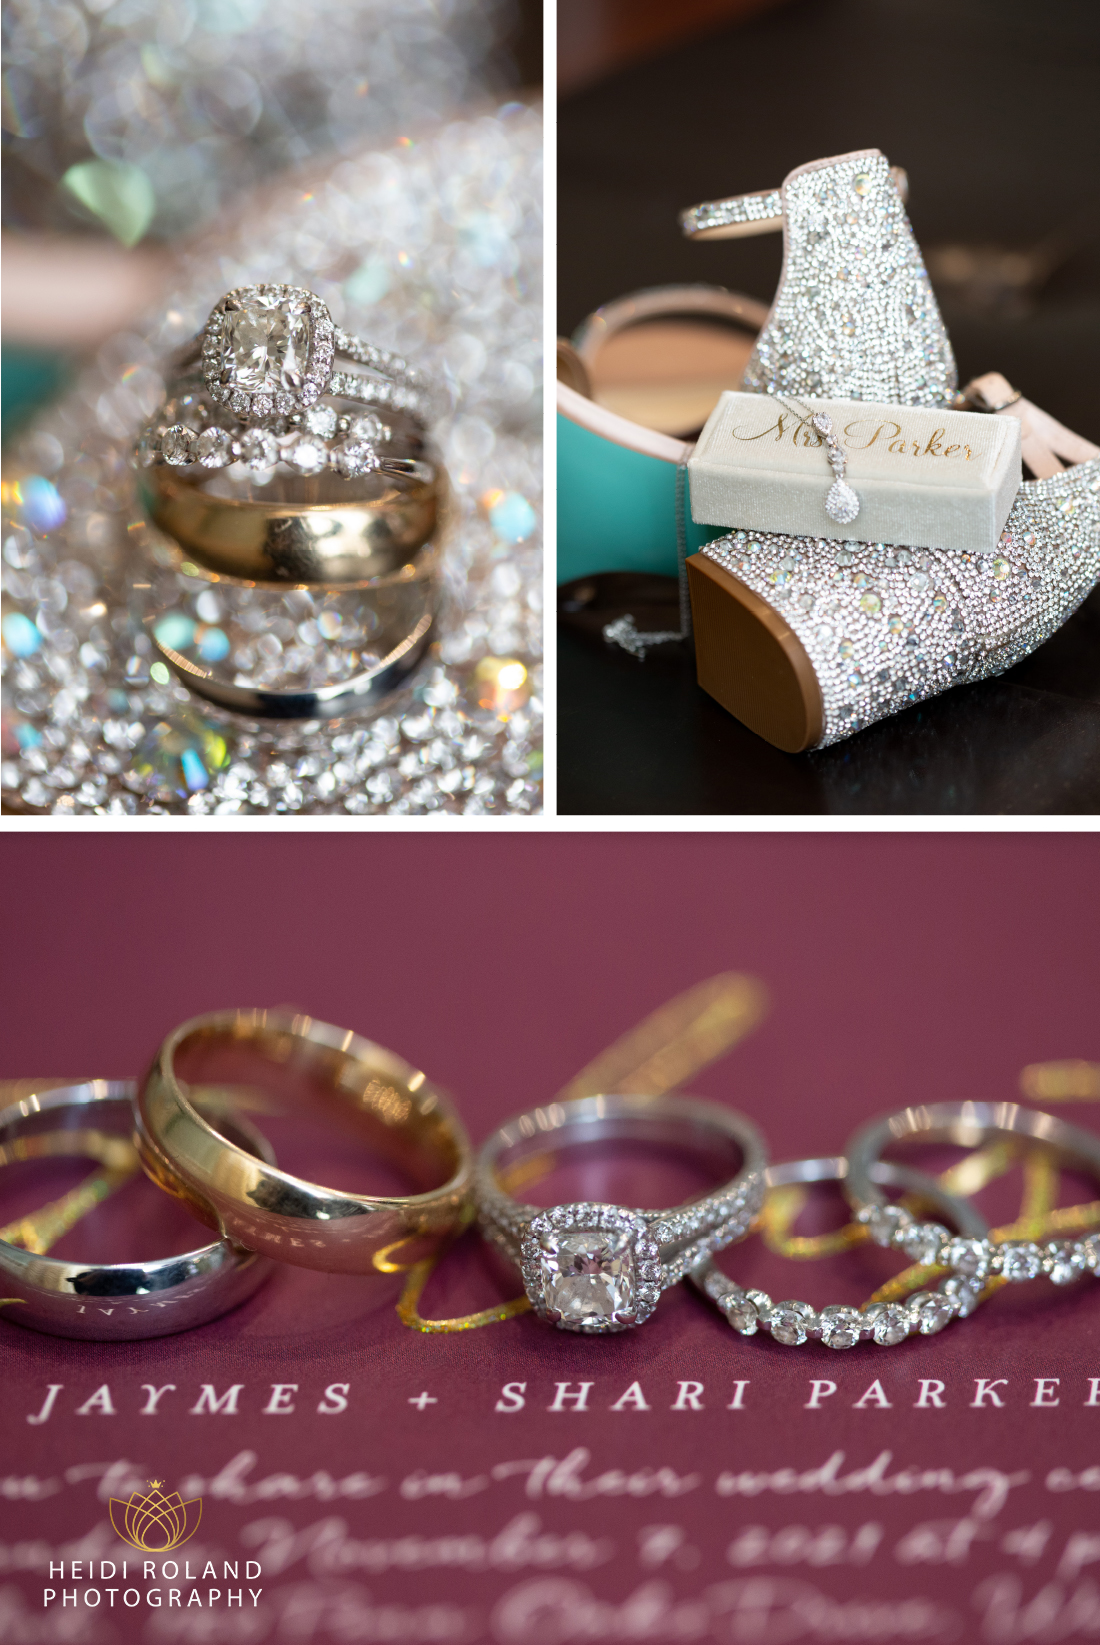 bridal details sparkling shoes, rings and invitation